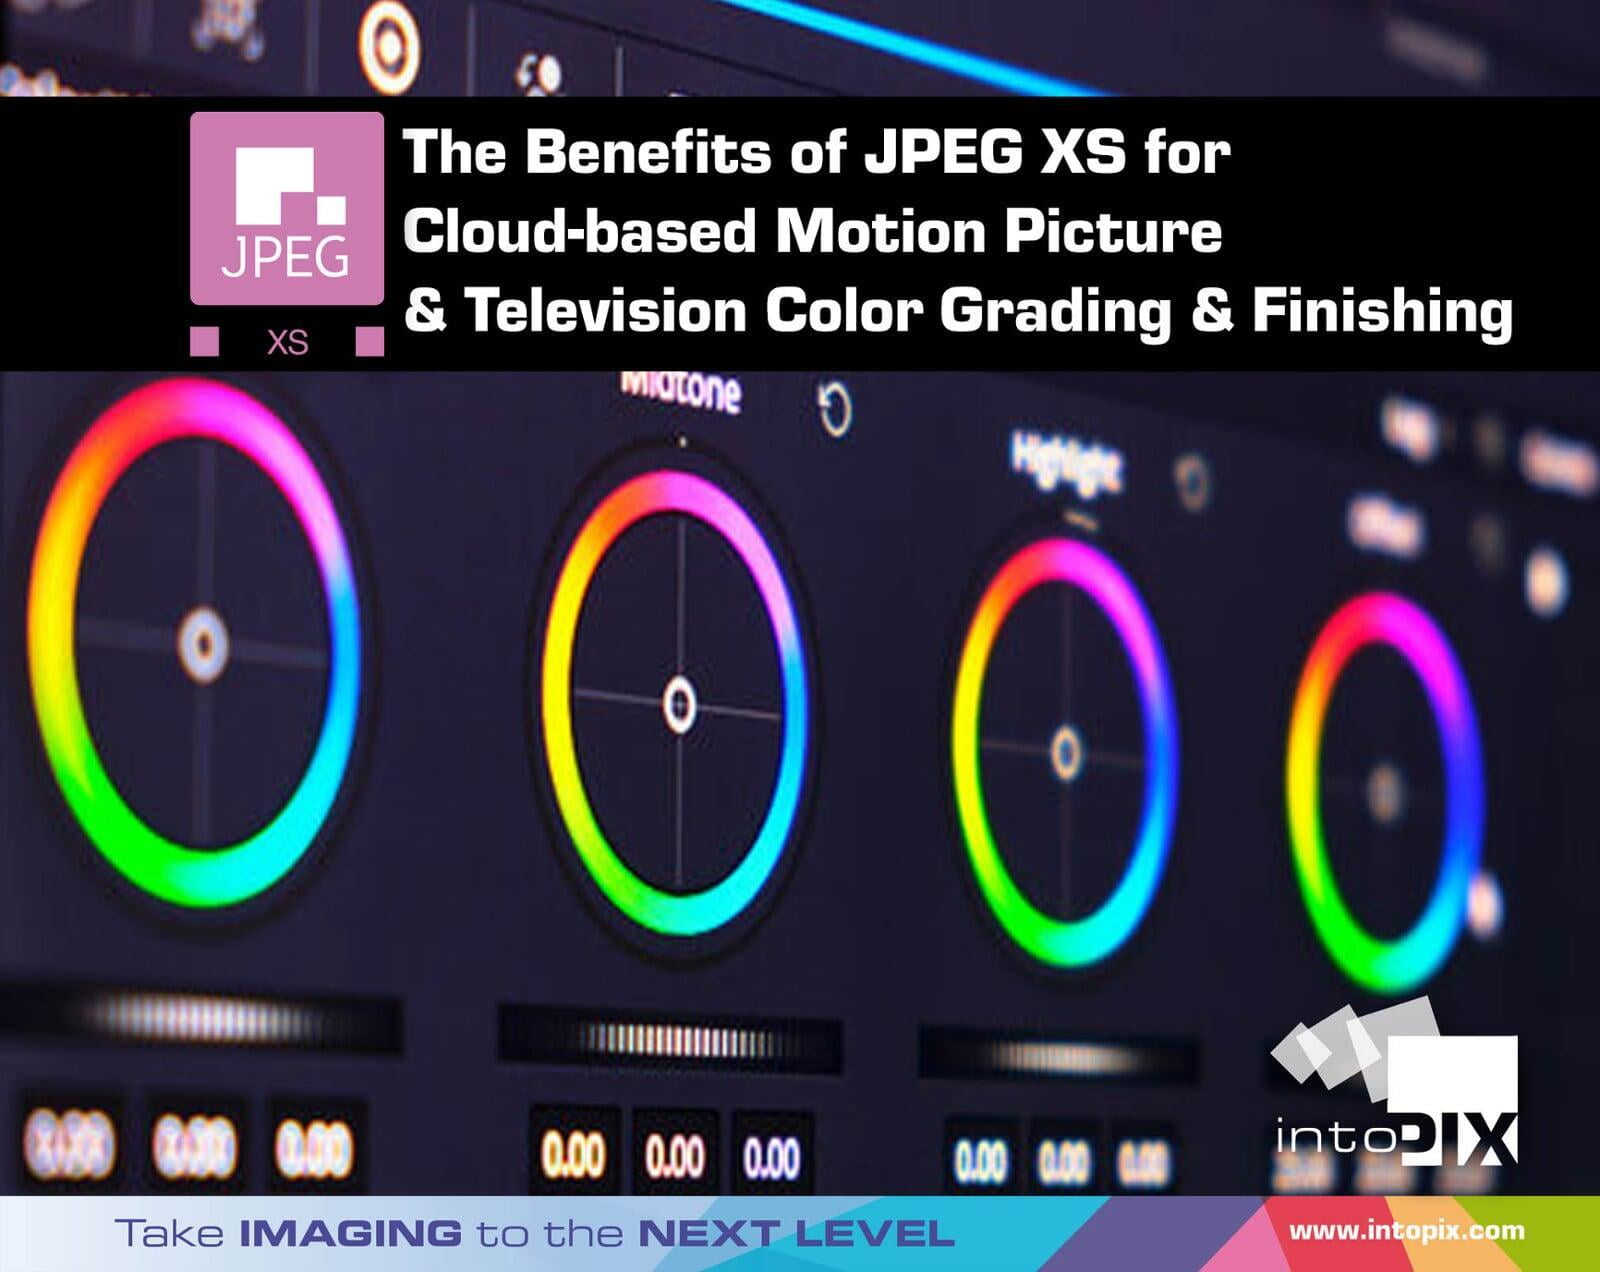 CloudベースのMotion Picture and Television Color Grading and FinishingのためにJPEG XSの利点を活用する。